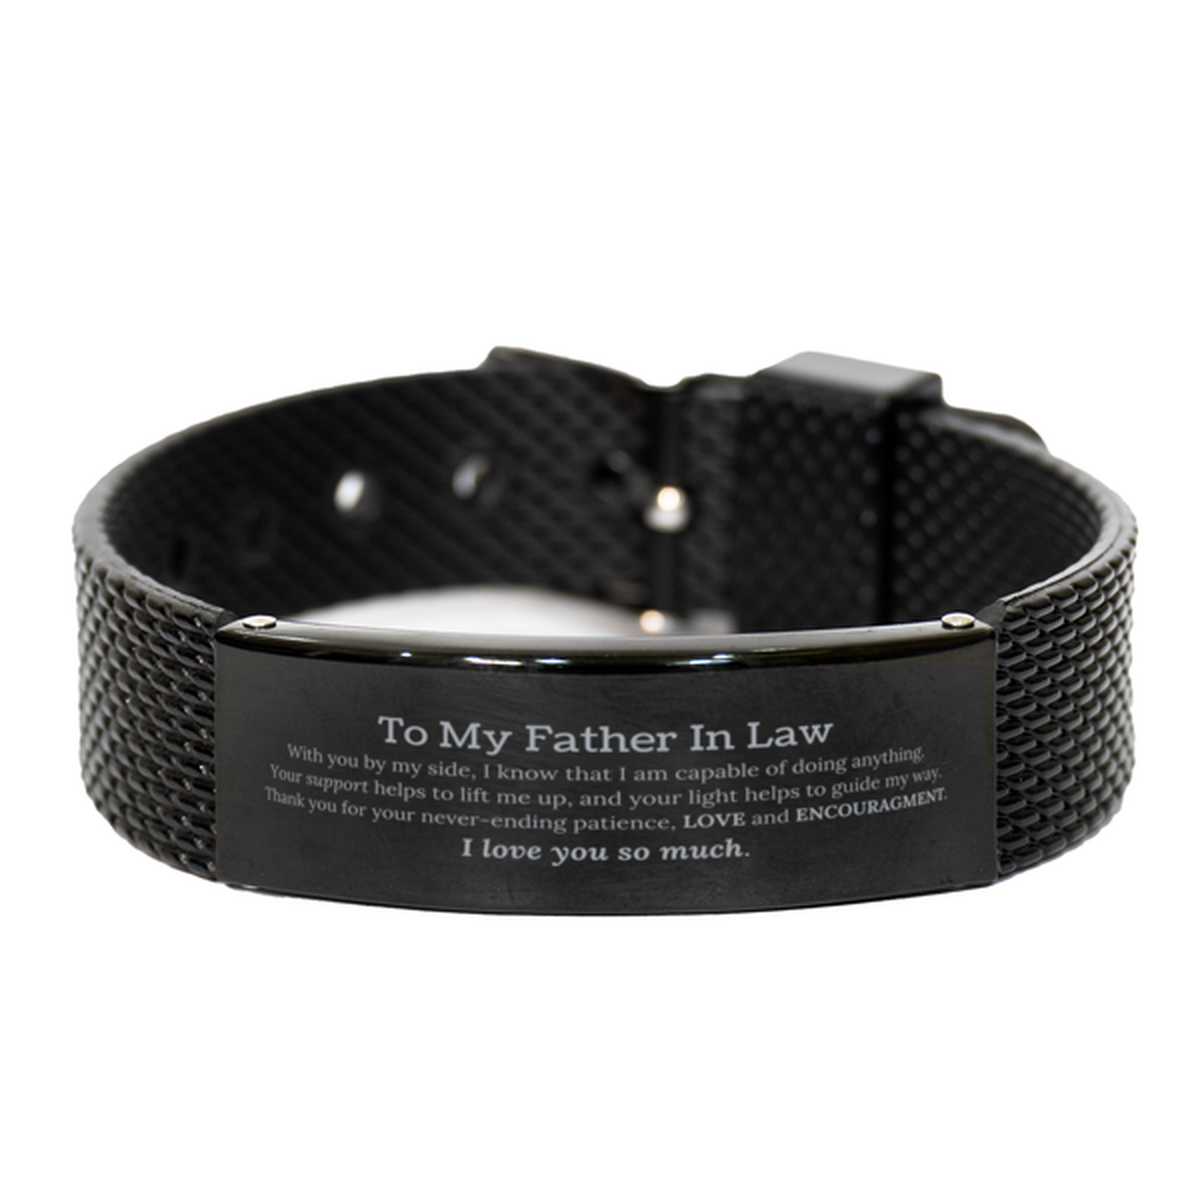 Appreciation Father In Law Black Shark Mesh Bracelet Gifts, To My Father In Law Birthday Christmas Wedding Keepsake Gifts for Father In Law With you by my side, I know that I am capable of doing anything. I love you so much